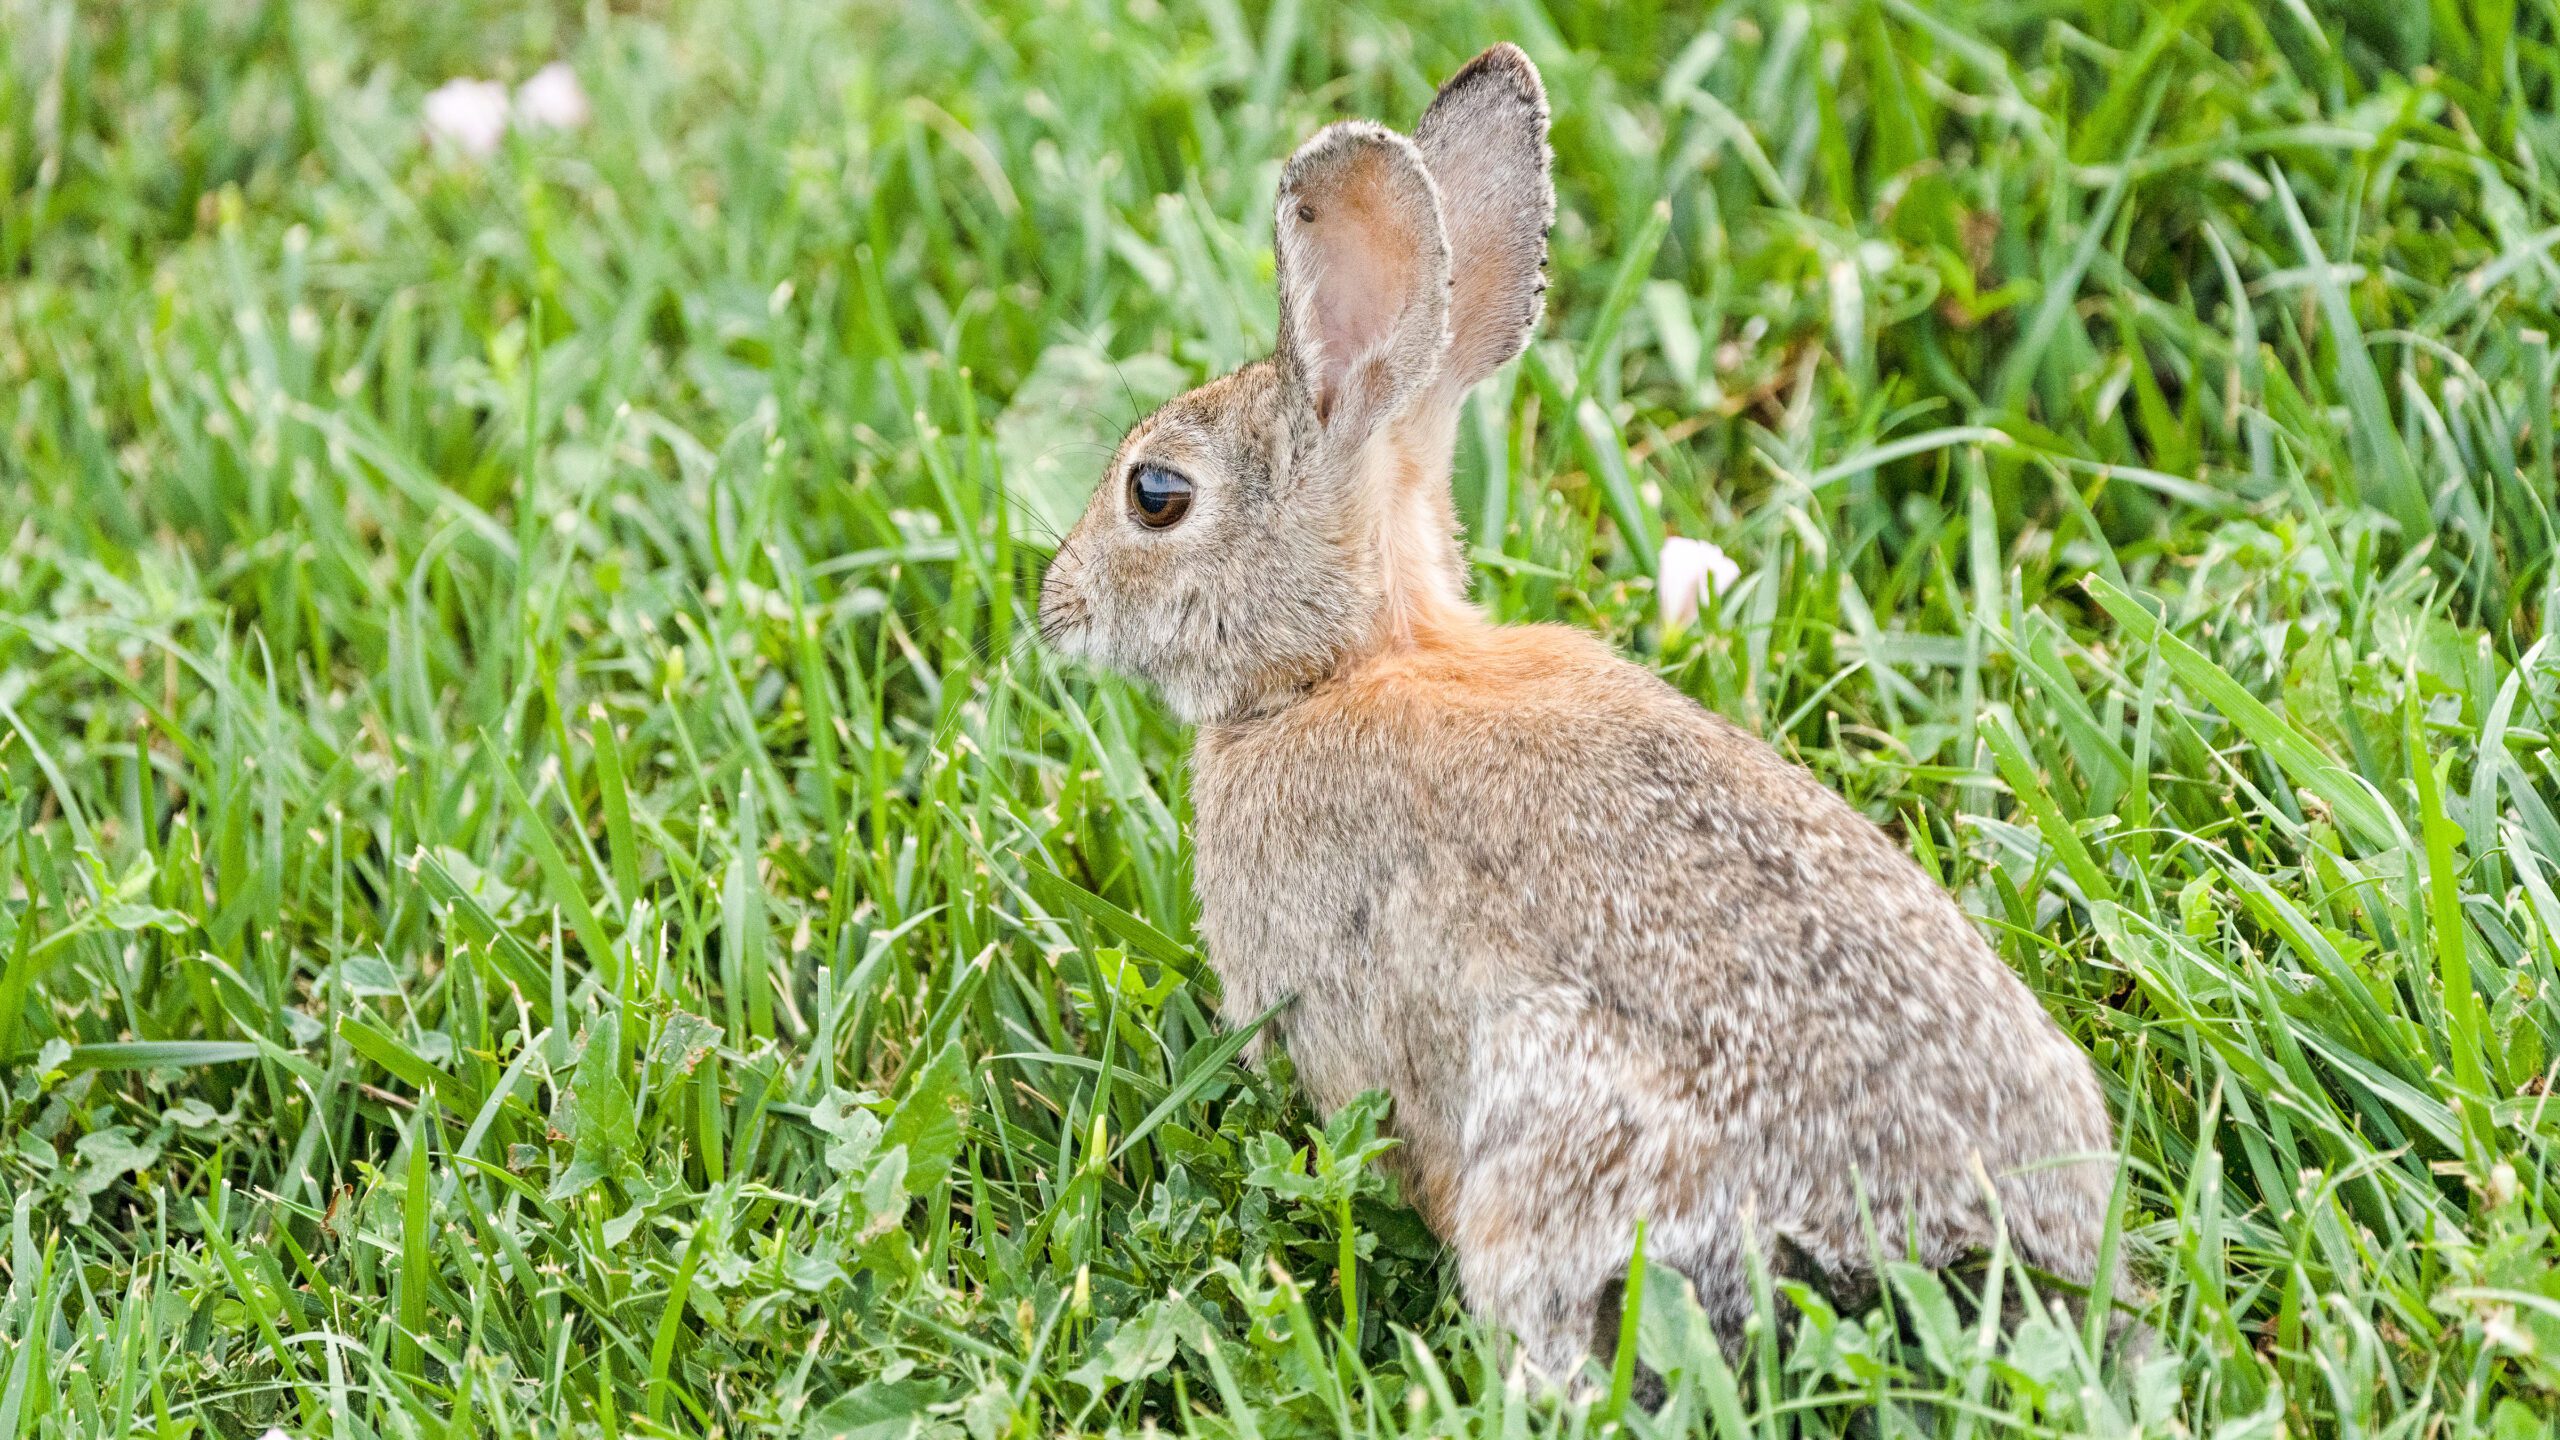 A desert cottontail in the foothills of Salt Lake City.